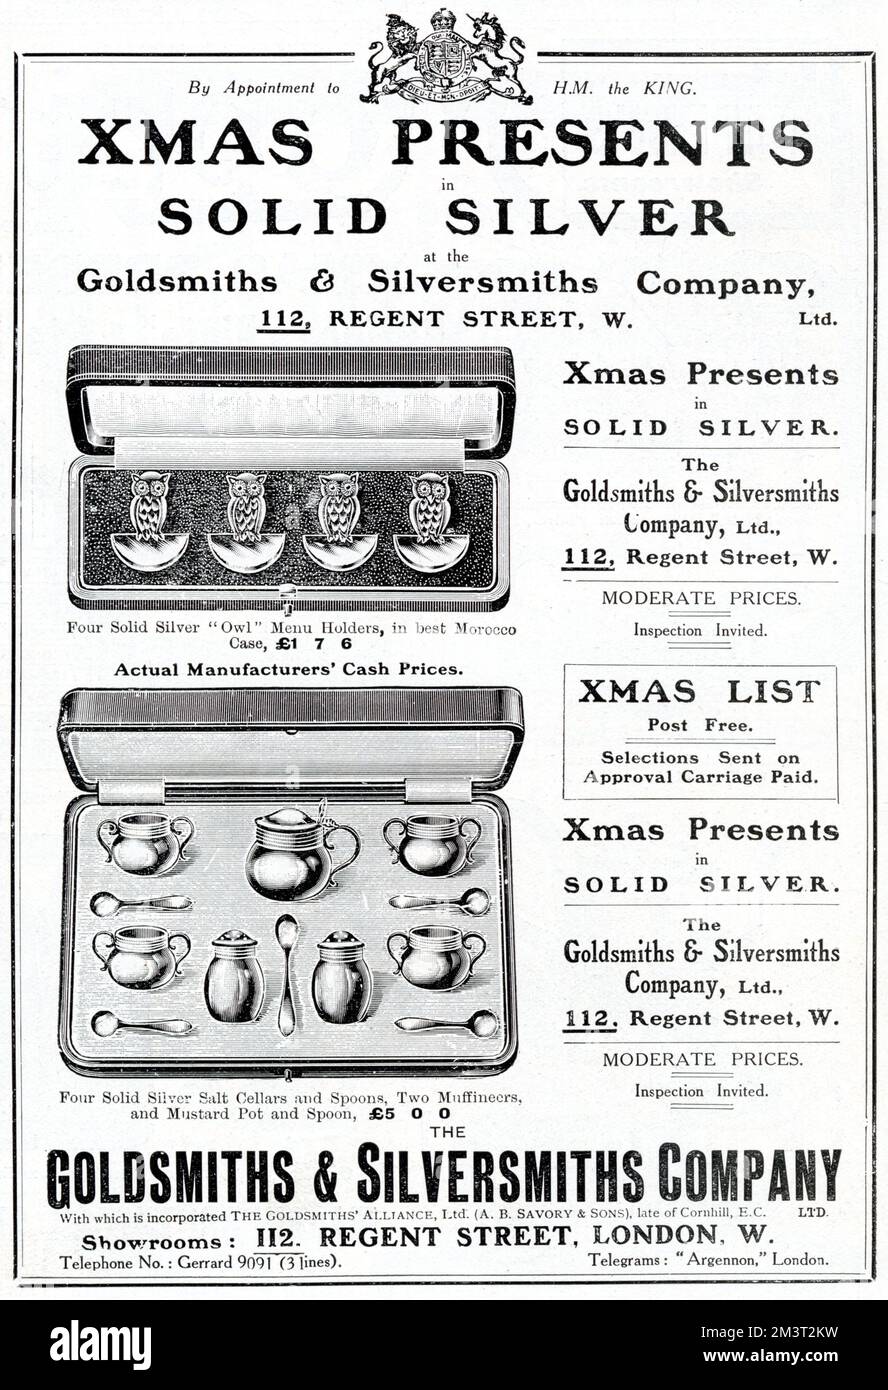 Advert for Xmas presents in solid silver at the Goldsmiths & Silversmiths Company, 112 Regent Street, London. Four solid silver owl menu holders; salt cellars and spoons, two muffineers, and mustard pot and spoon. Stock Photo